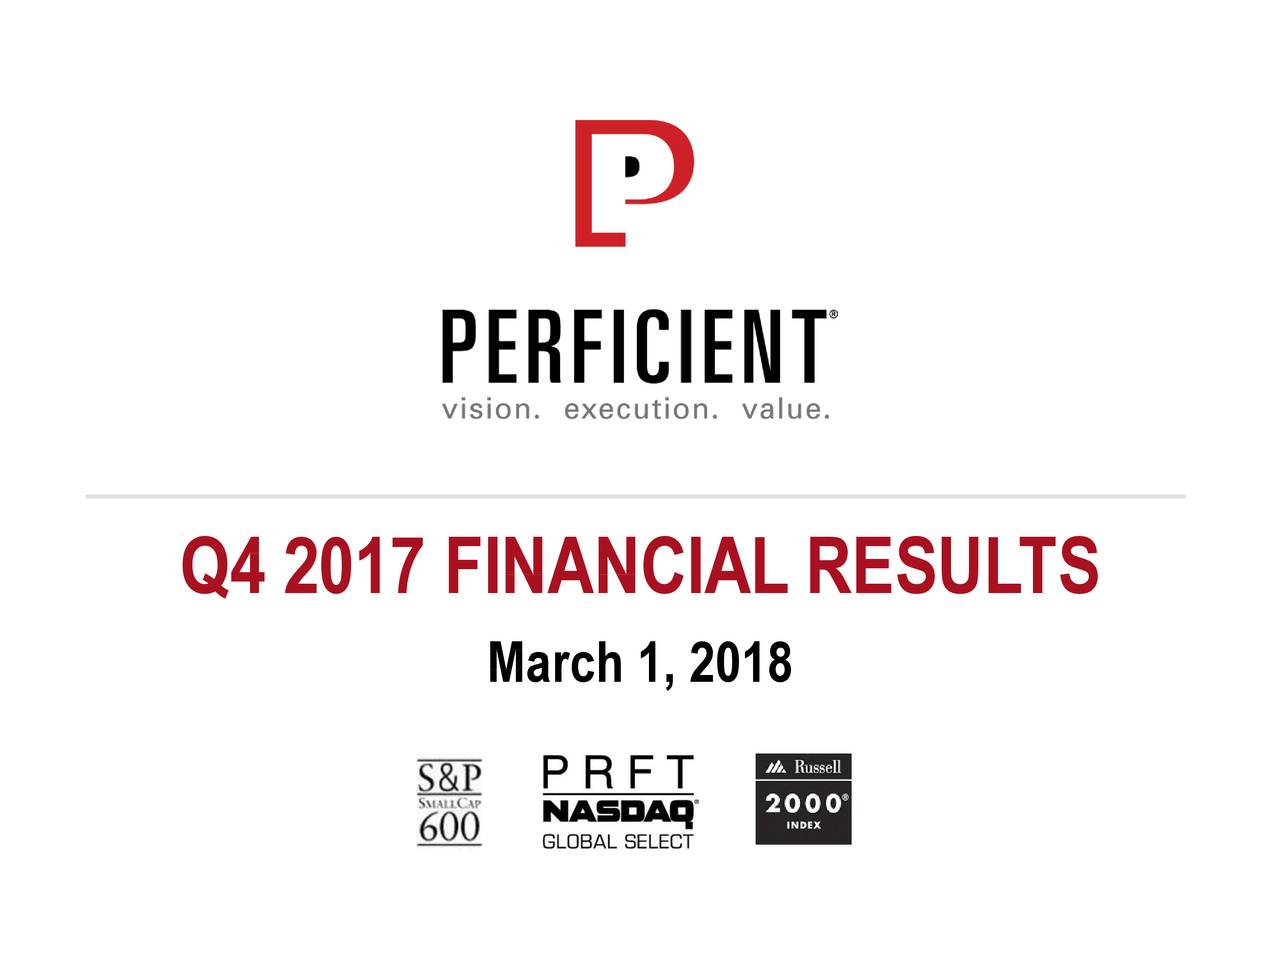 Q4 2017 FINANCIAL RESULTS